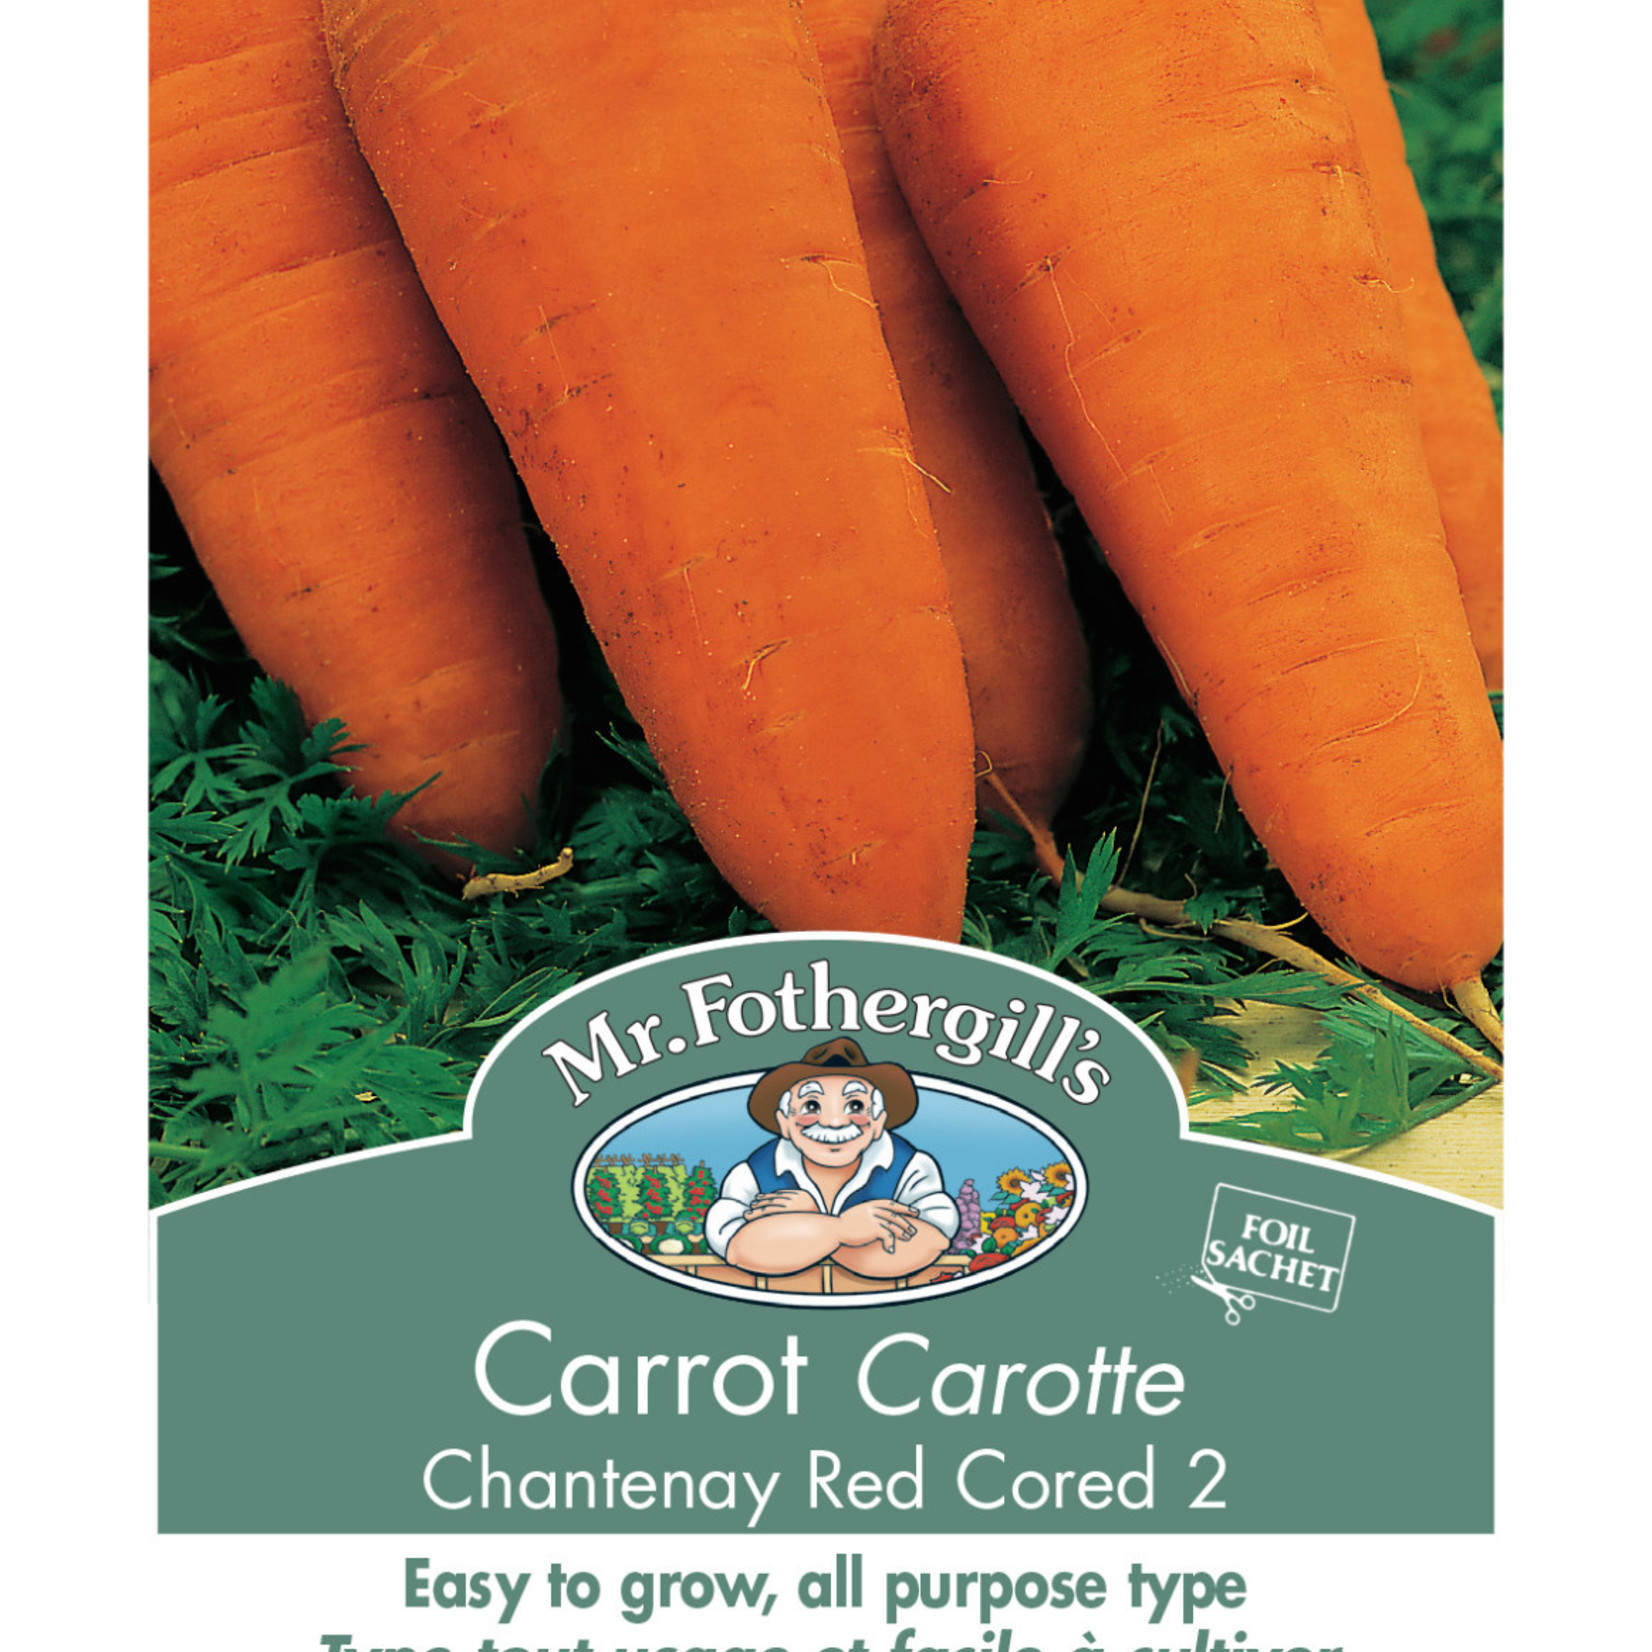 Mr. Fothergill's CARROT Chantenay Red Cored 2